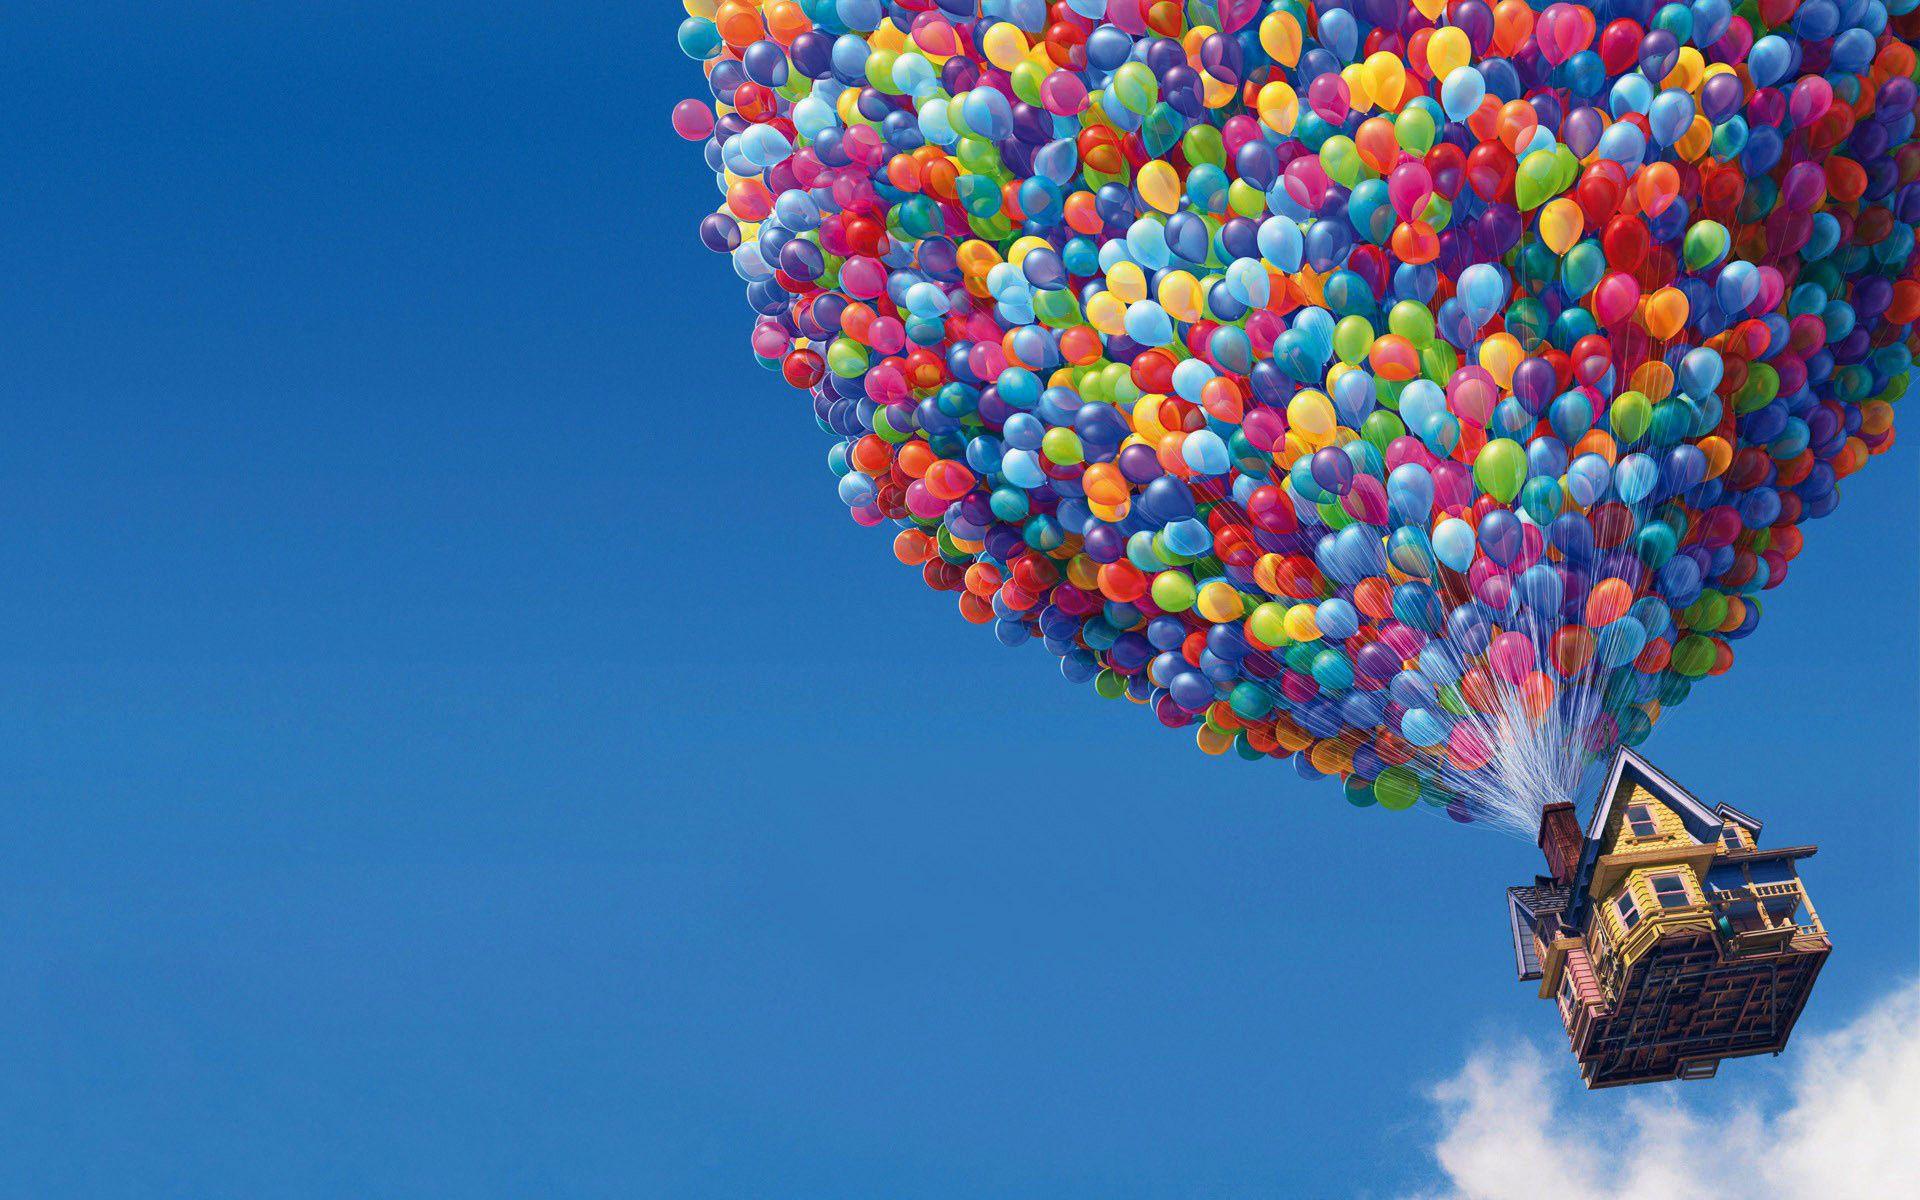 UP Movie Balloons House Wallpaper